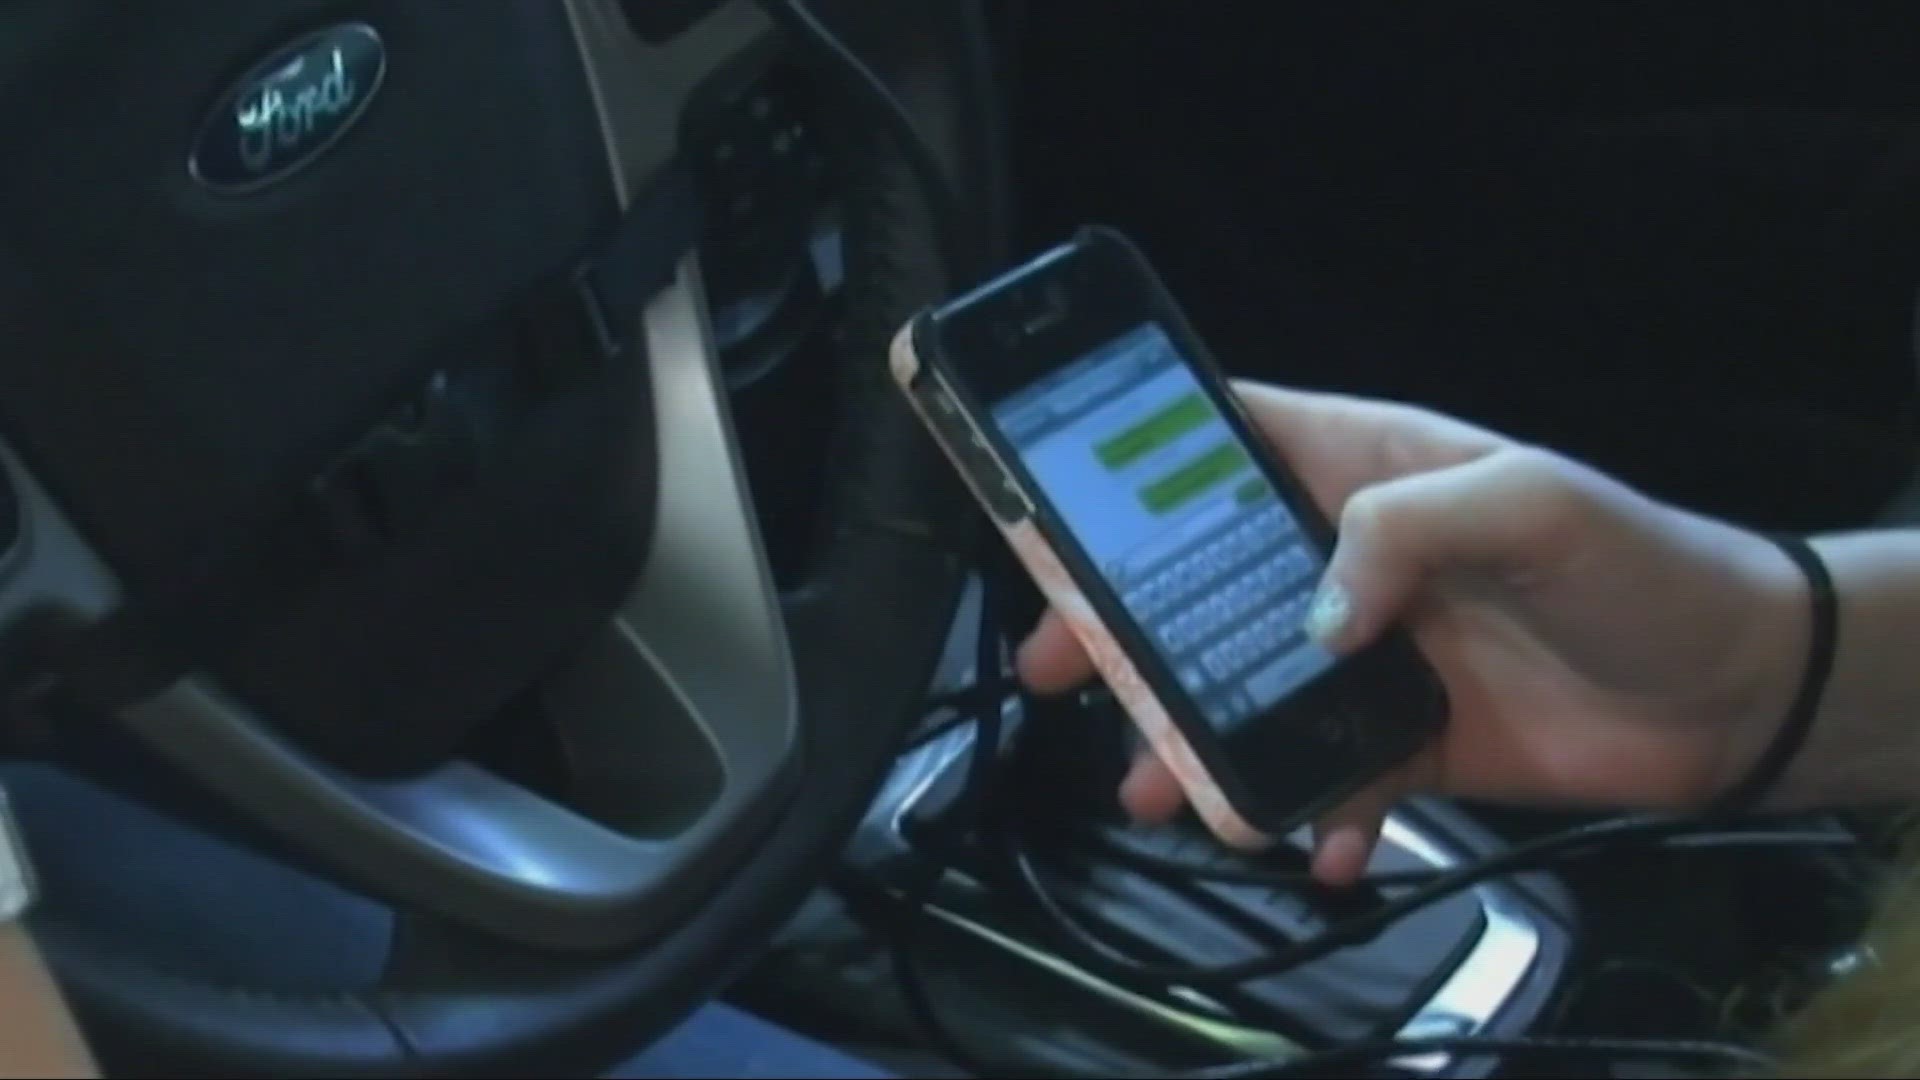 A new law went into effect in Ohio on April 4, 2023 making distracted driving a 'primary offense'.